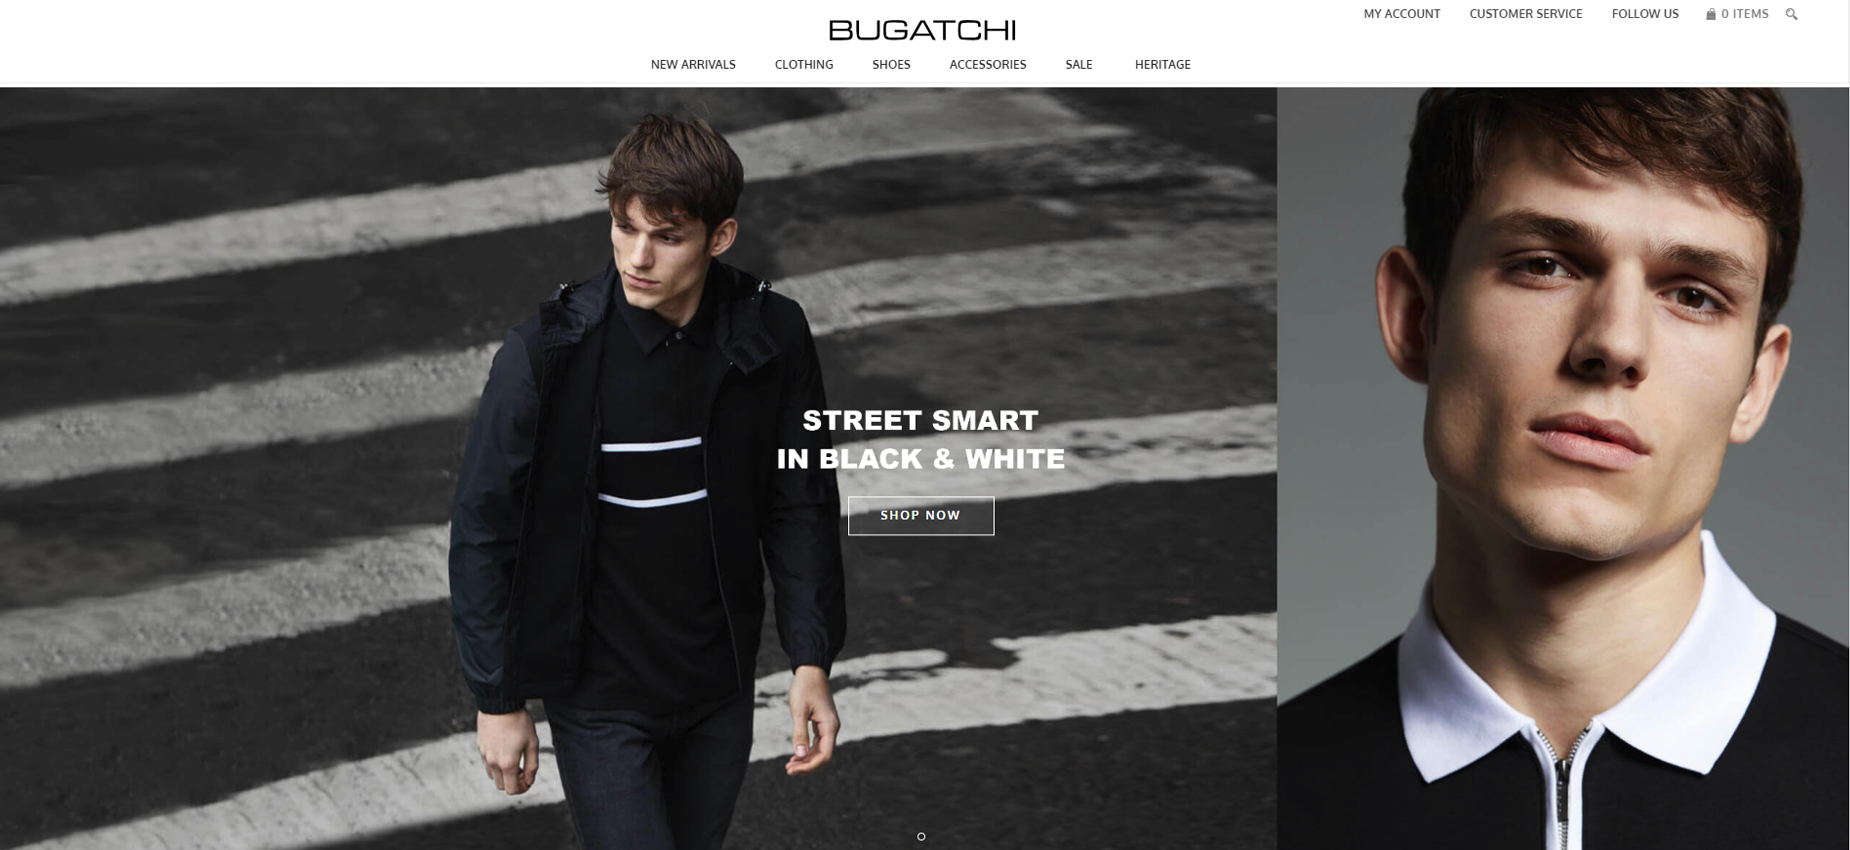 New Advertiser Bugatchi Is Online with an Amazing Payout 4.8%! - Mopubi.com